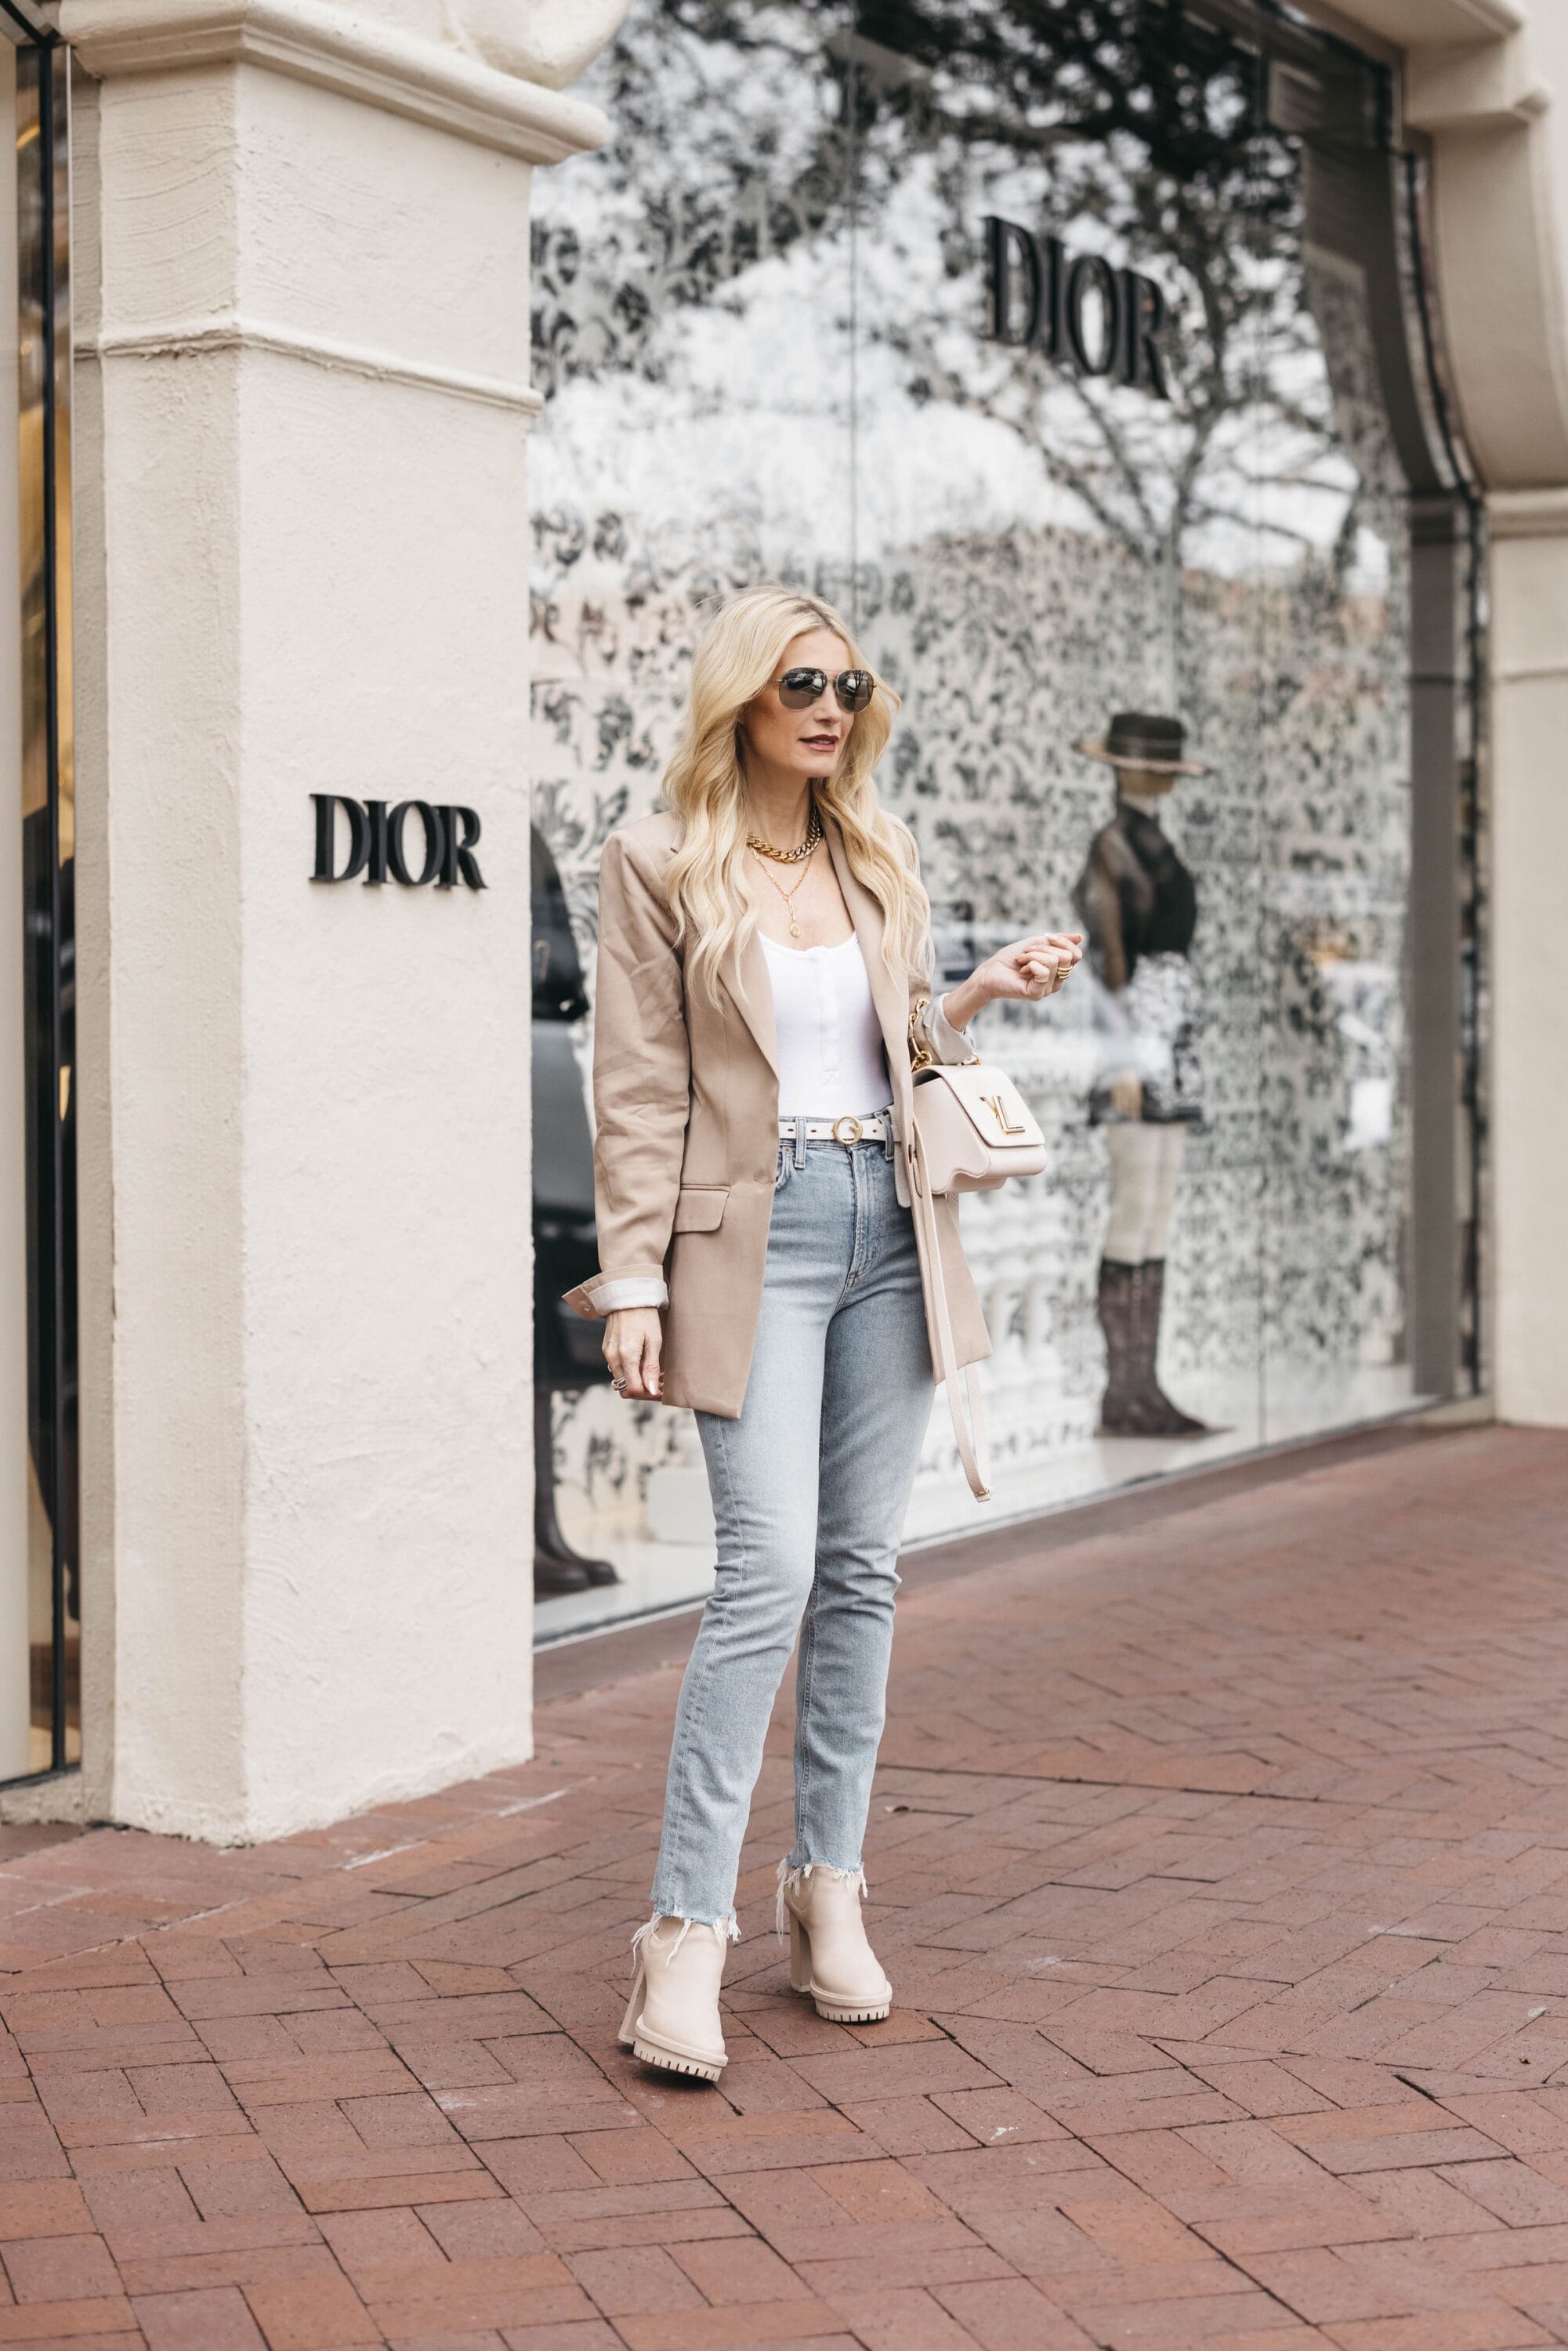 Ove 40 fashion blogger wearing overzied blazer with white bodysuit and light wash jeans as one of 5 Spring transitional outfits.